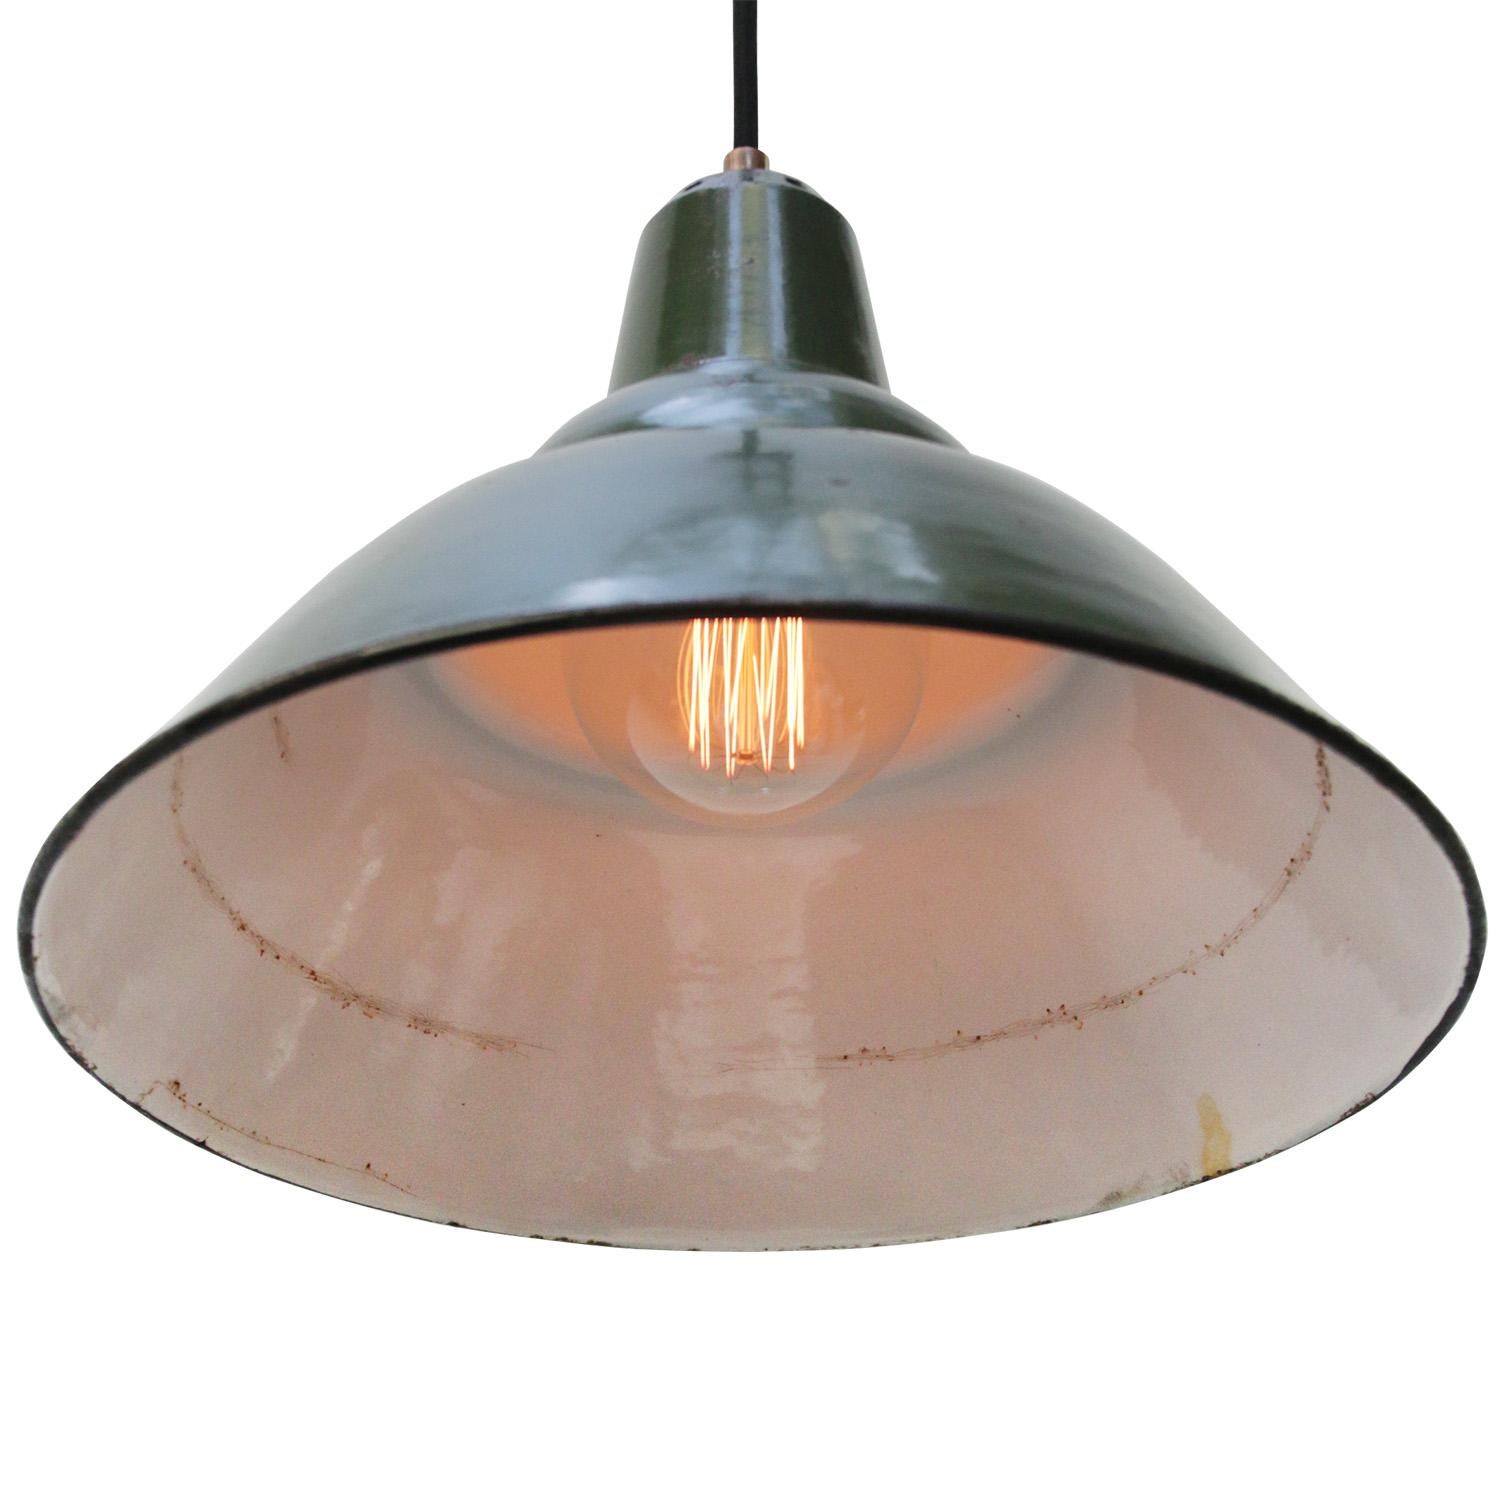 British Green Enamel Vintage Industrial Pendant Light In Good Condition For Sale In Amsterdam, NL